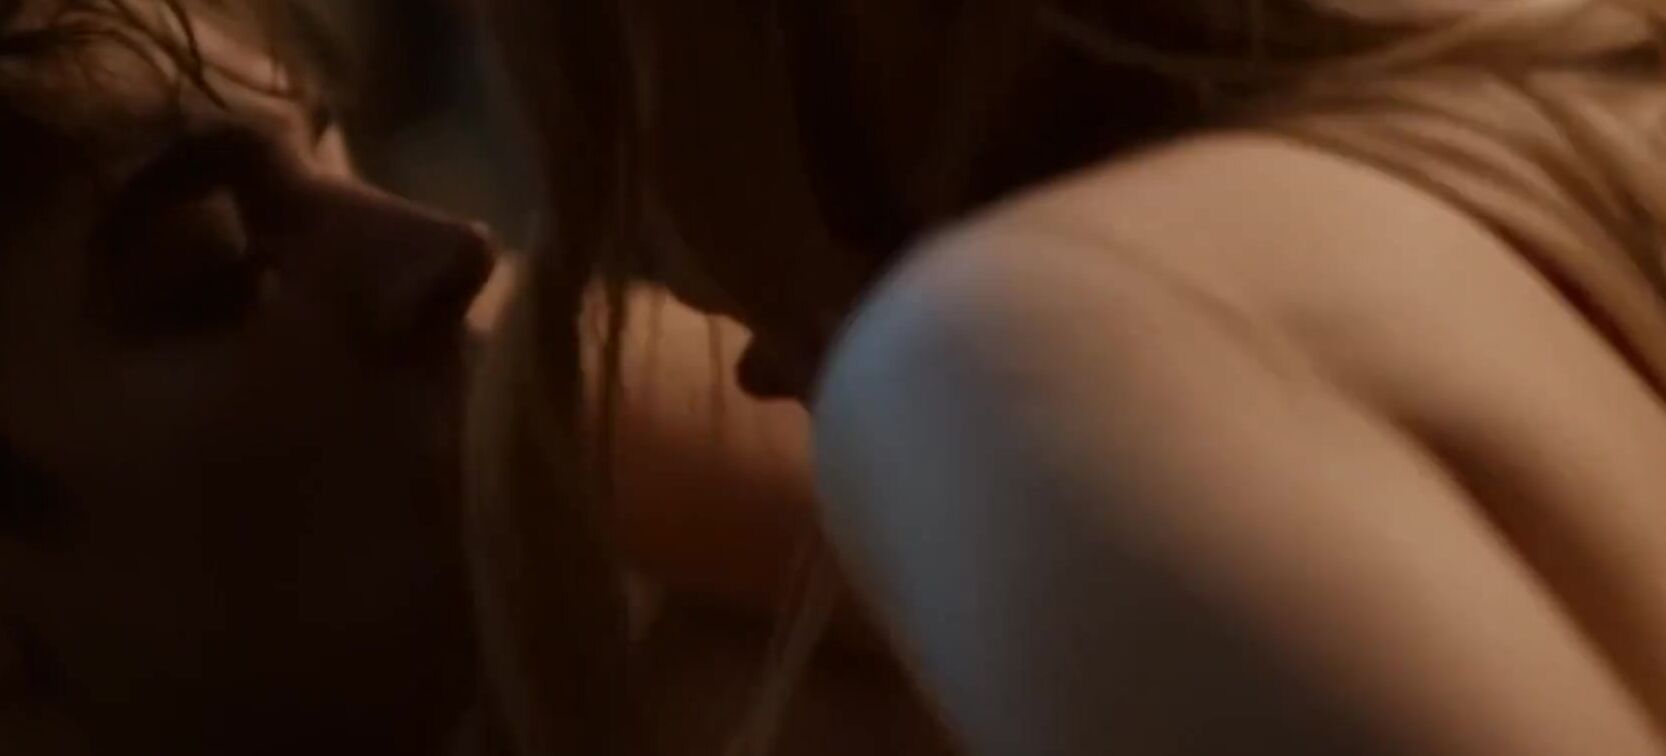 After We fell moive Hardin Scott and Tessa young romance scenes 4kPorn.XXX